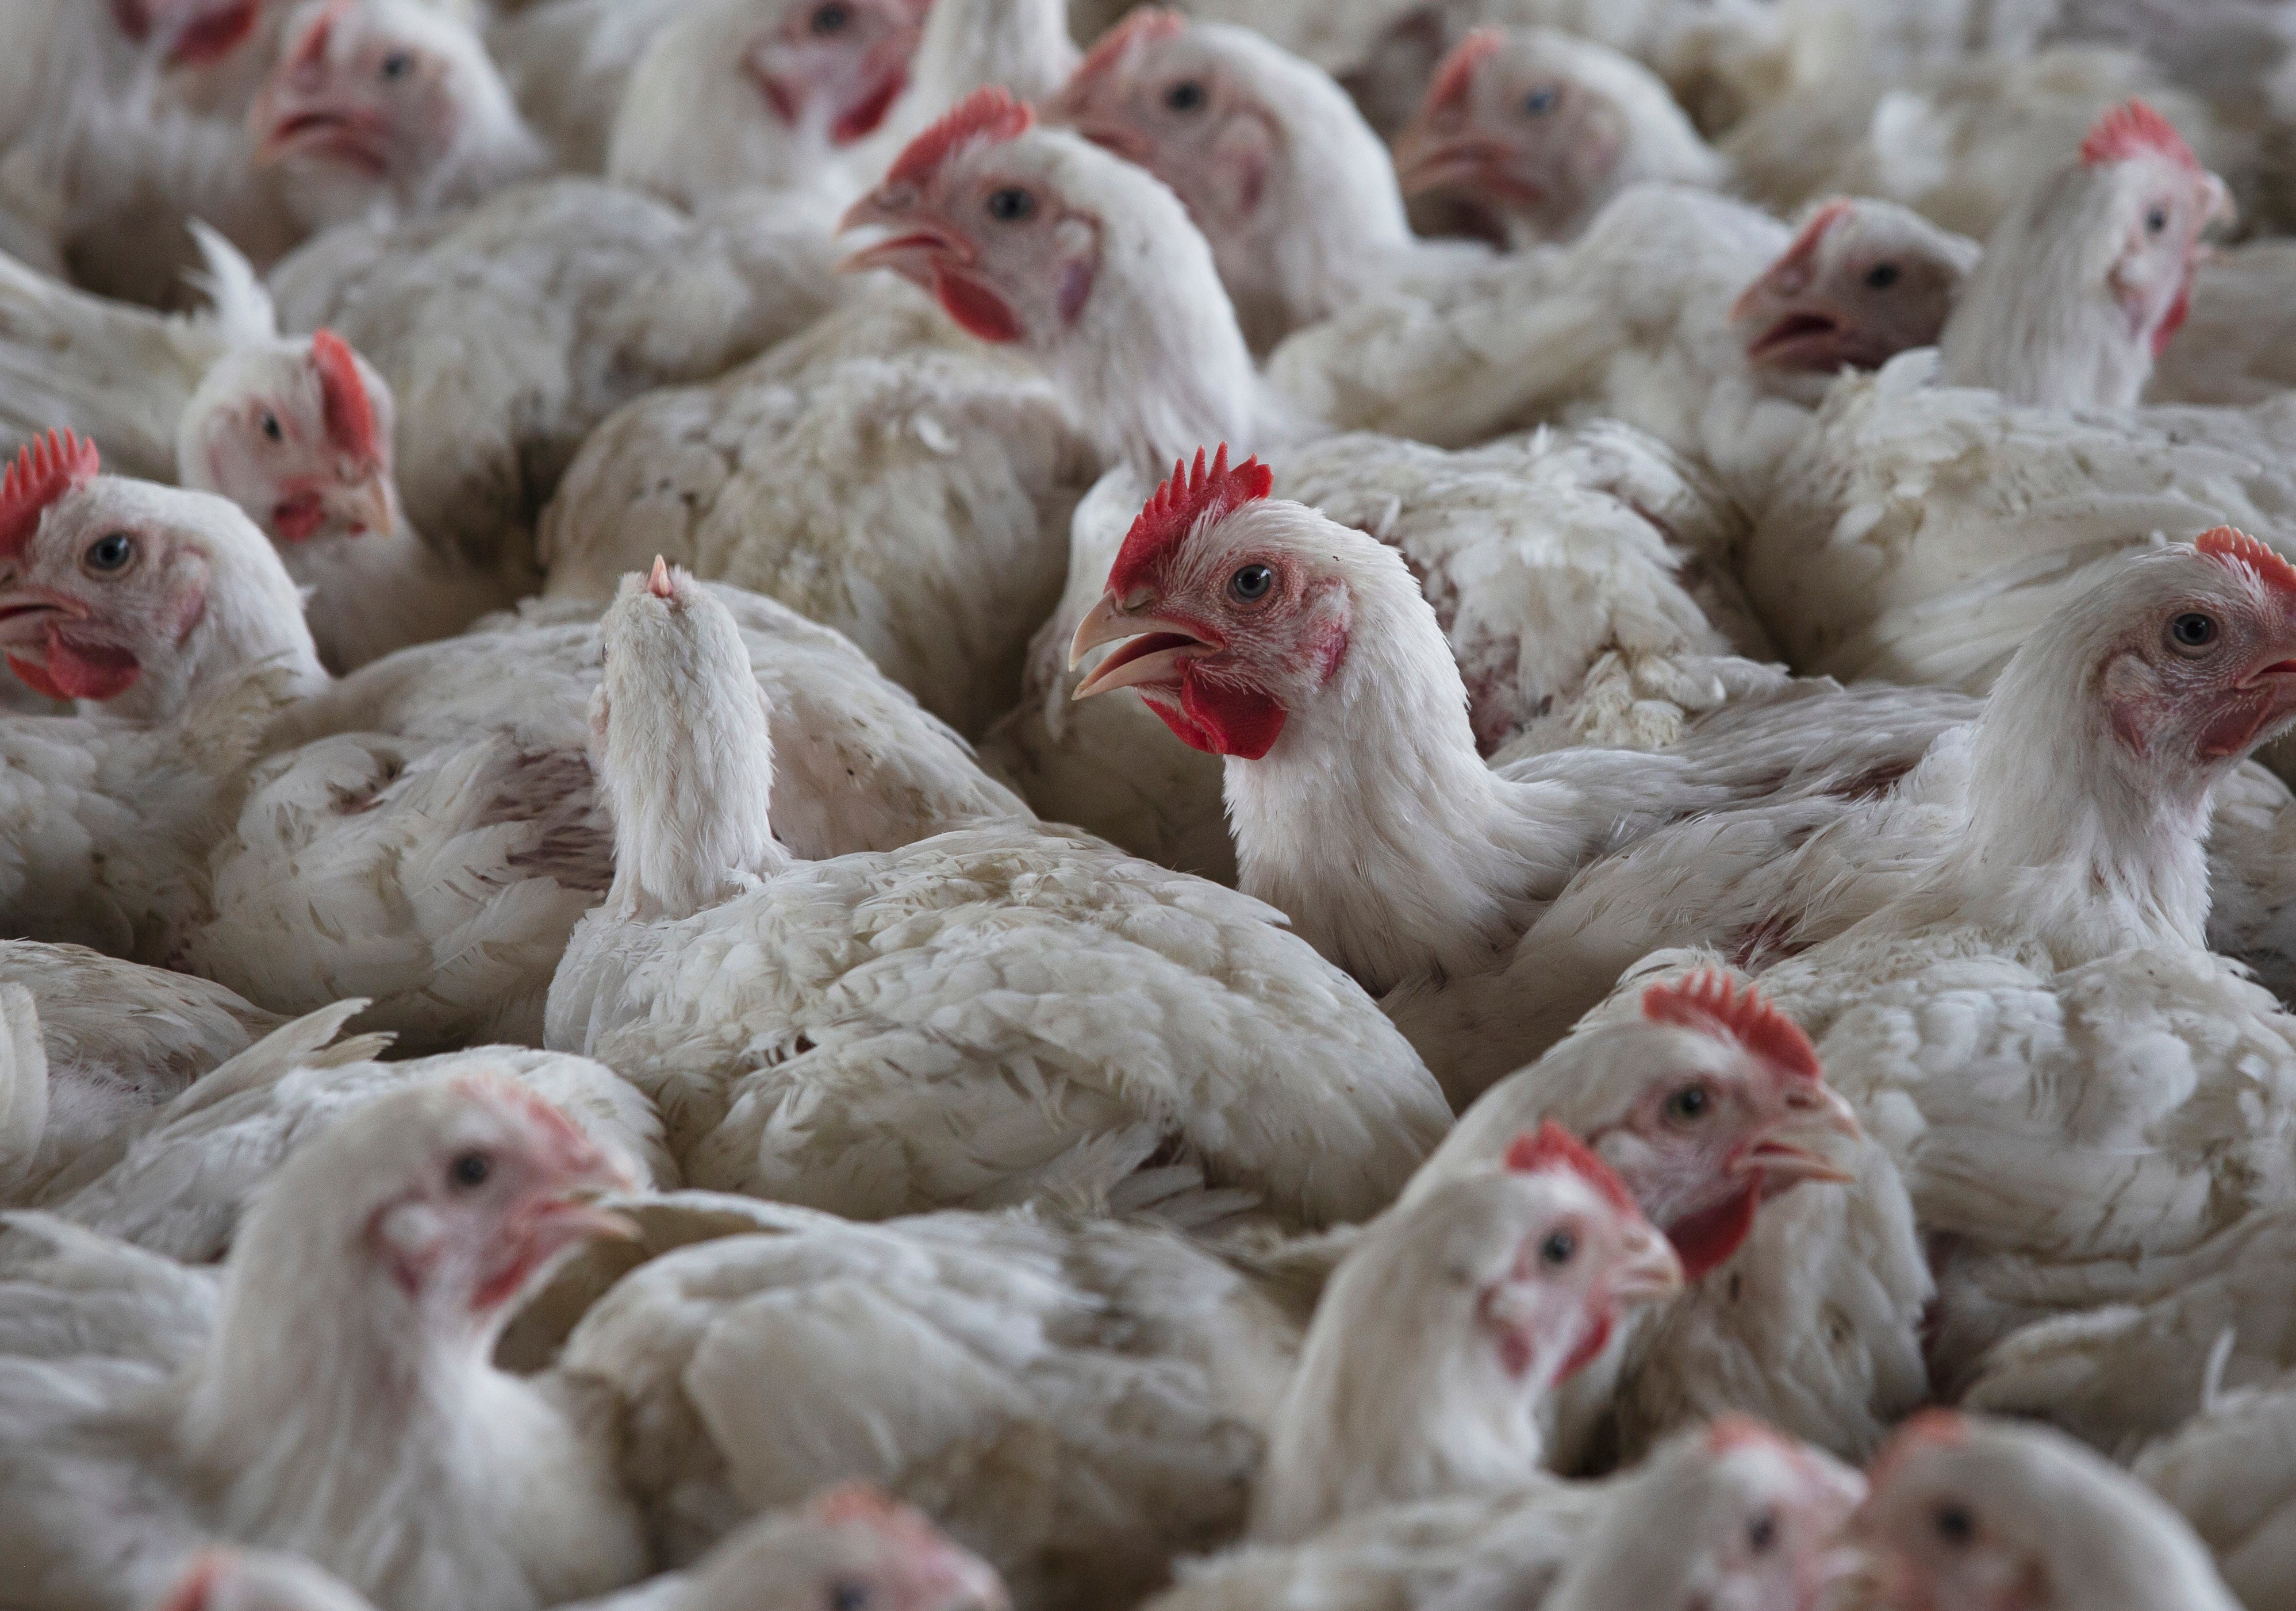 South Africa culls nearly 2.5M chickens in effort to contain bird flu